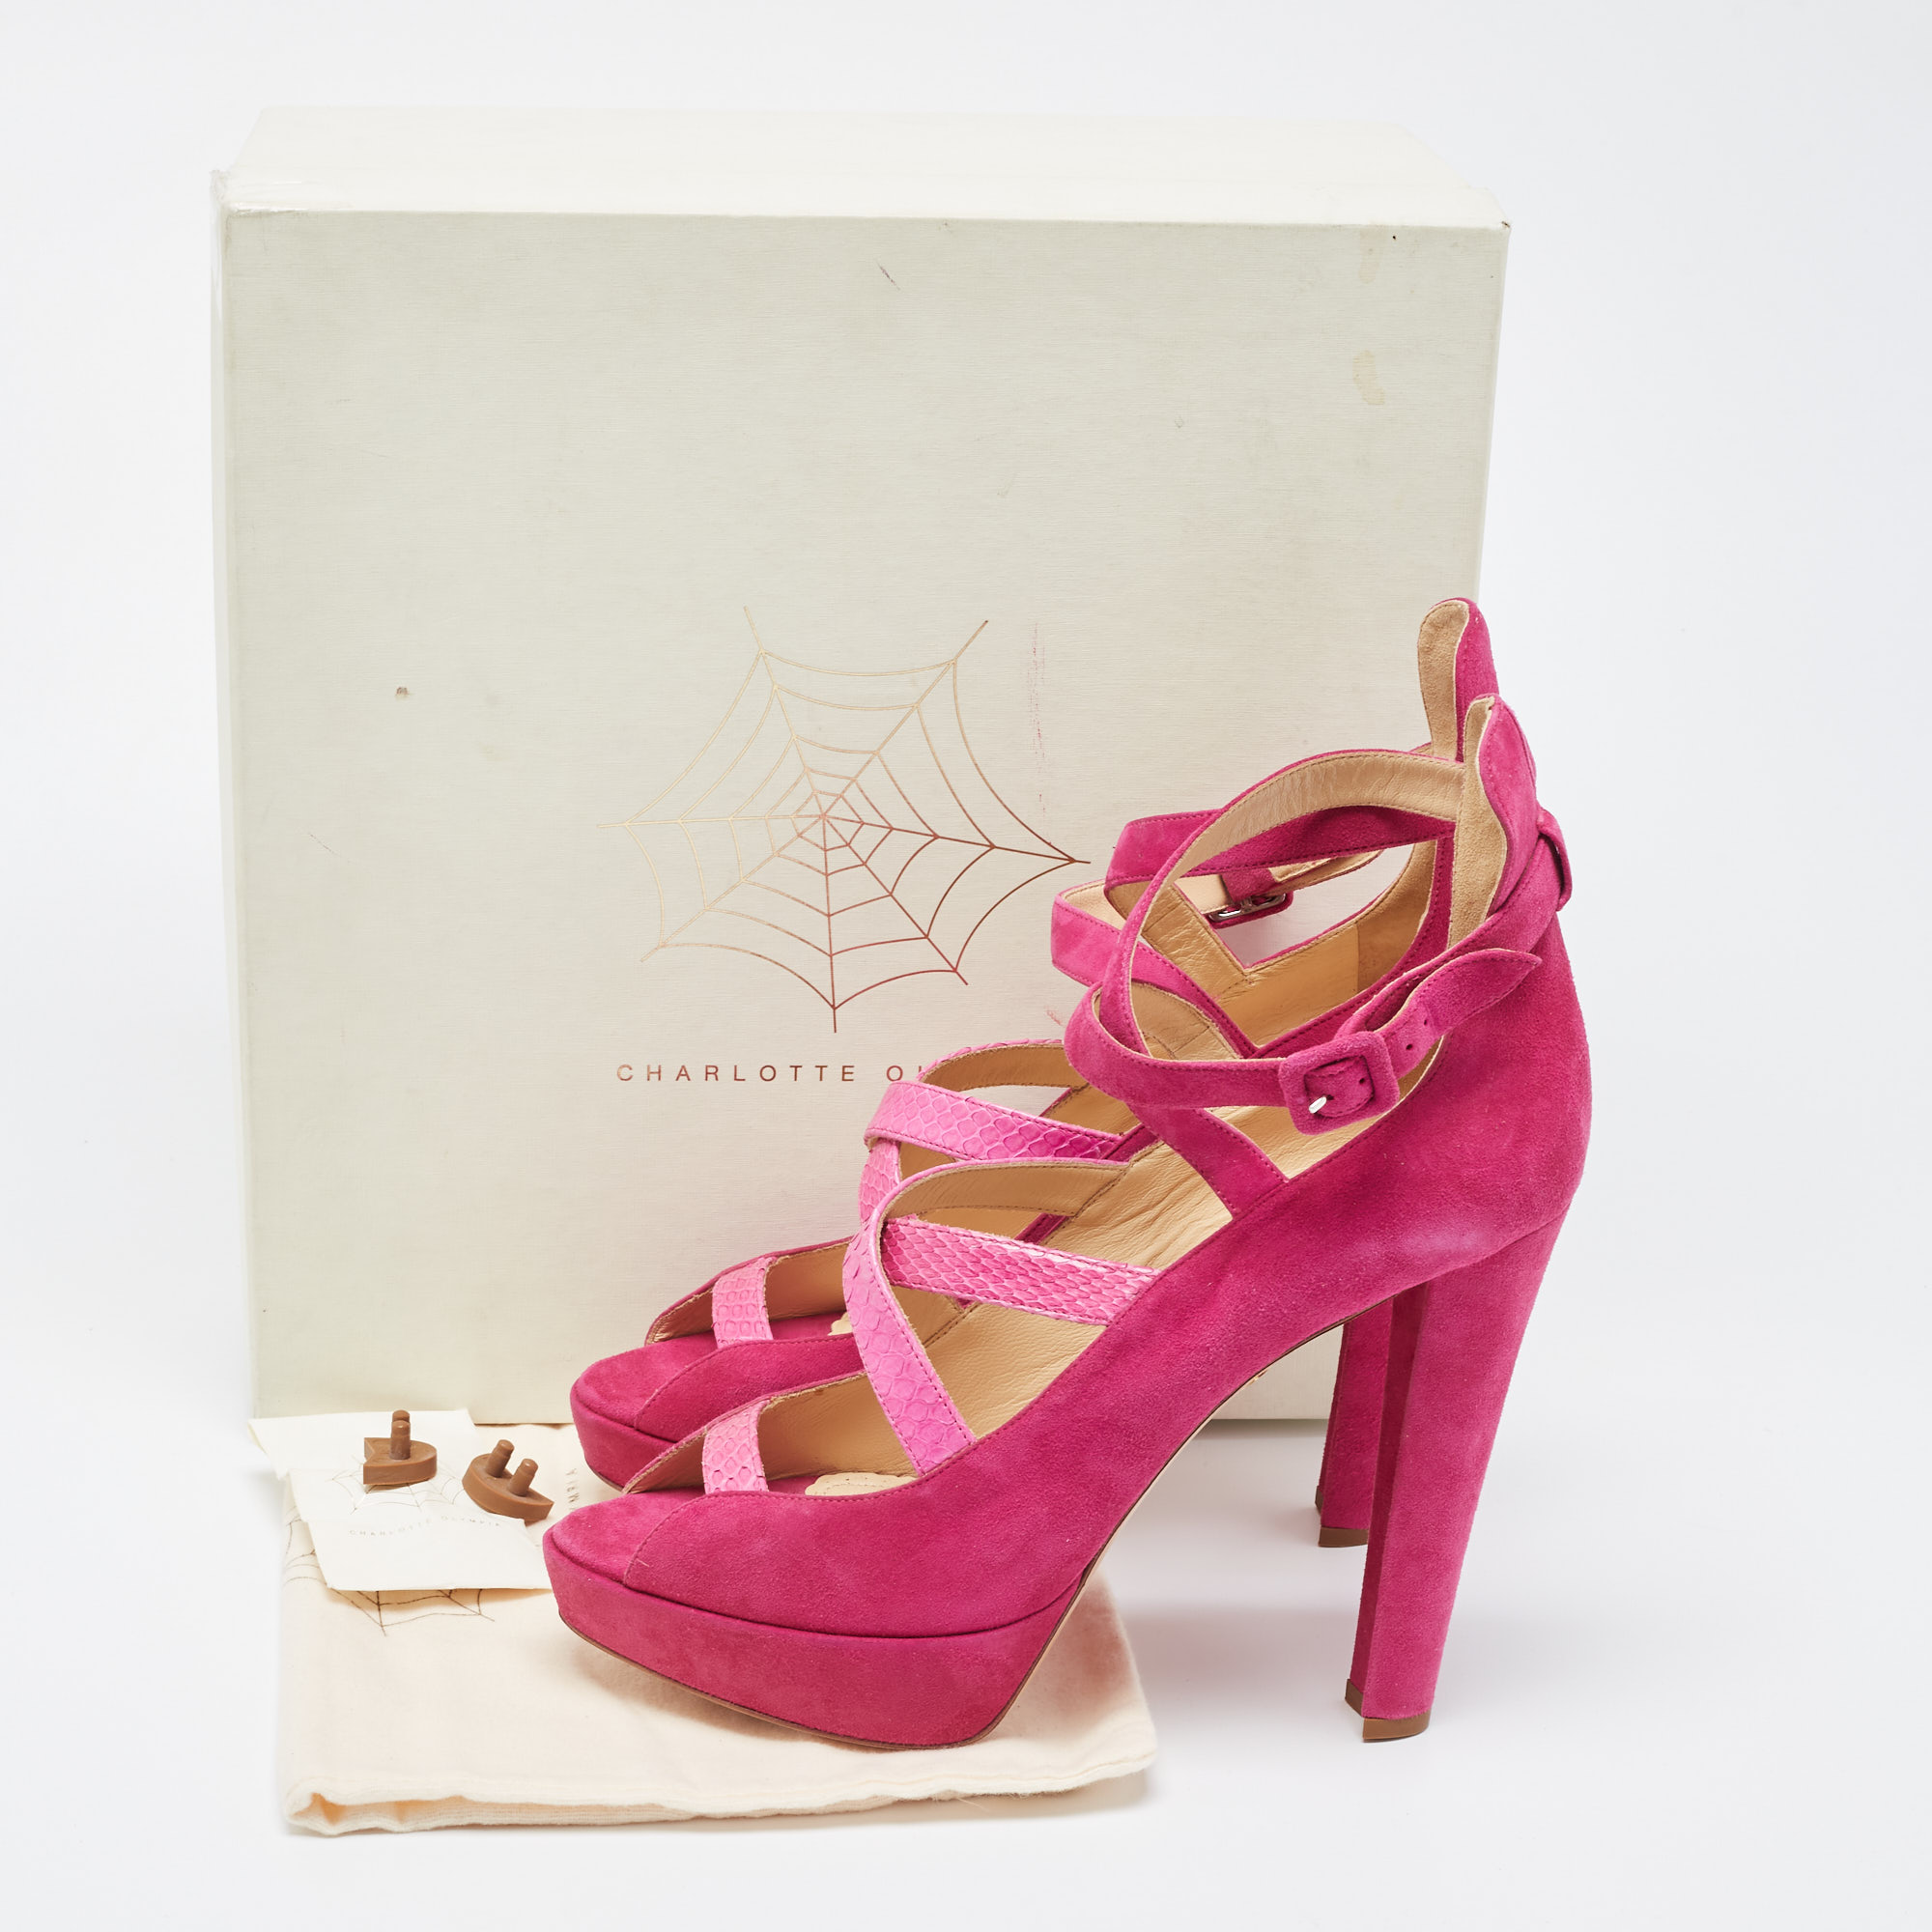 Charlotte Olympia Pink Suede And Python Platform Ankle Strap Pumps Size 41